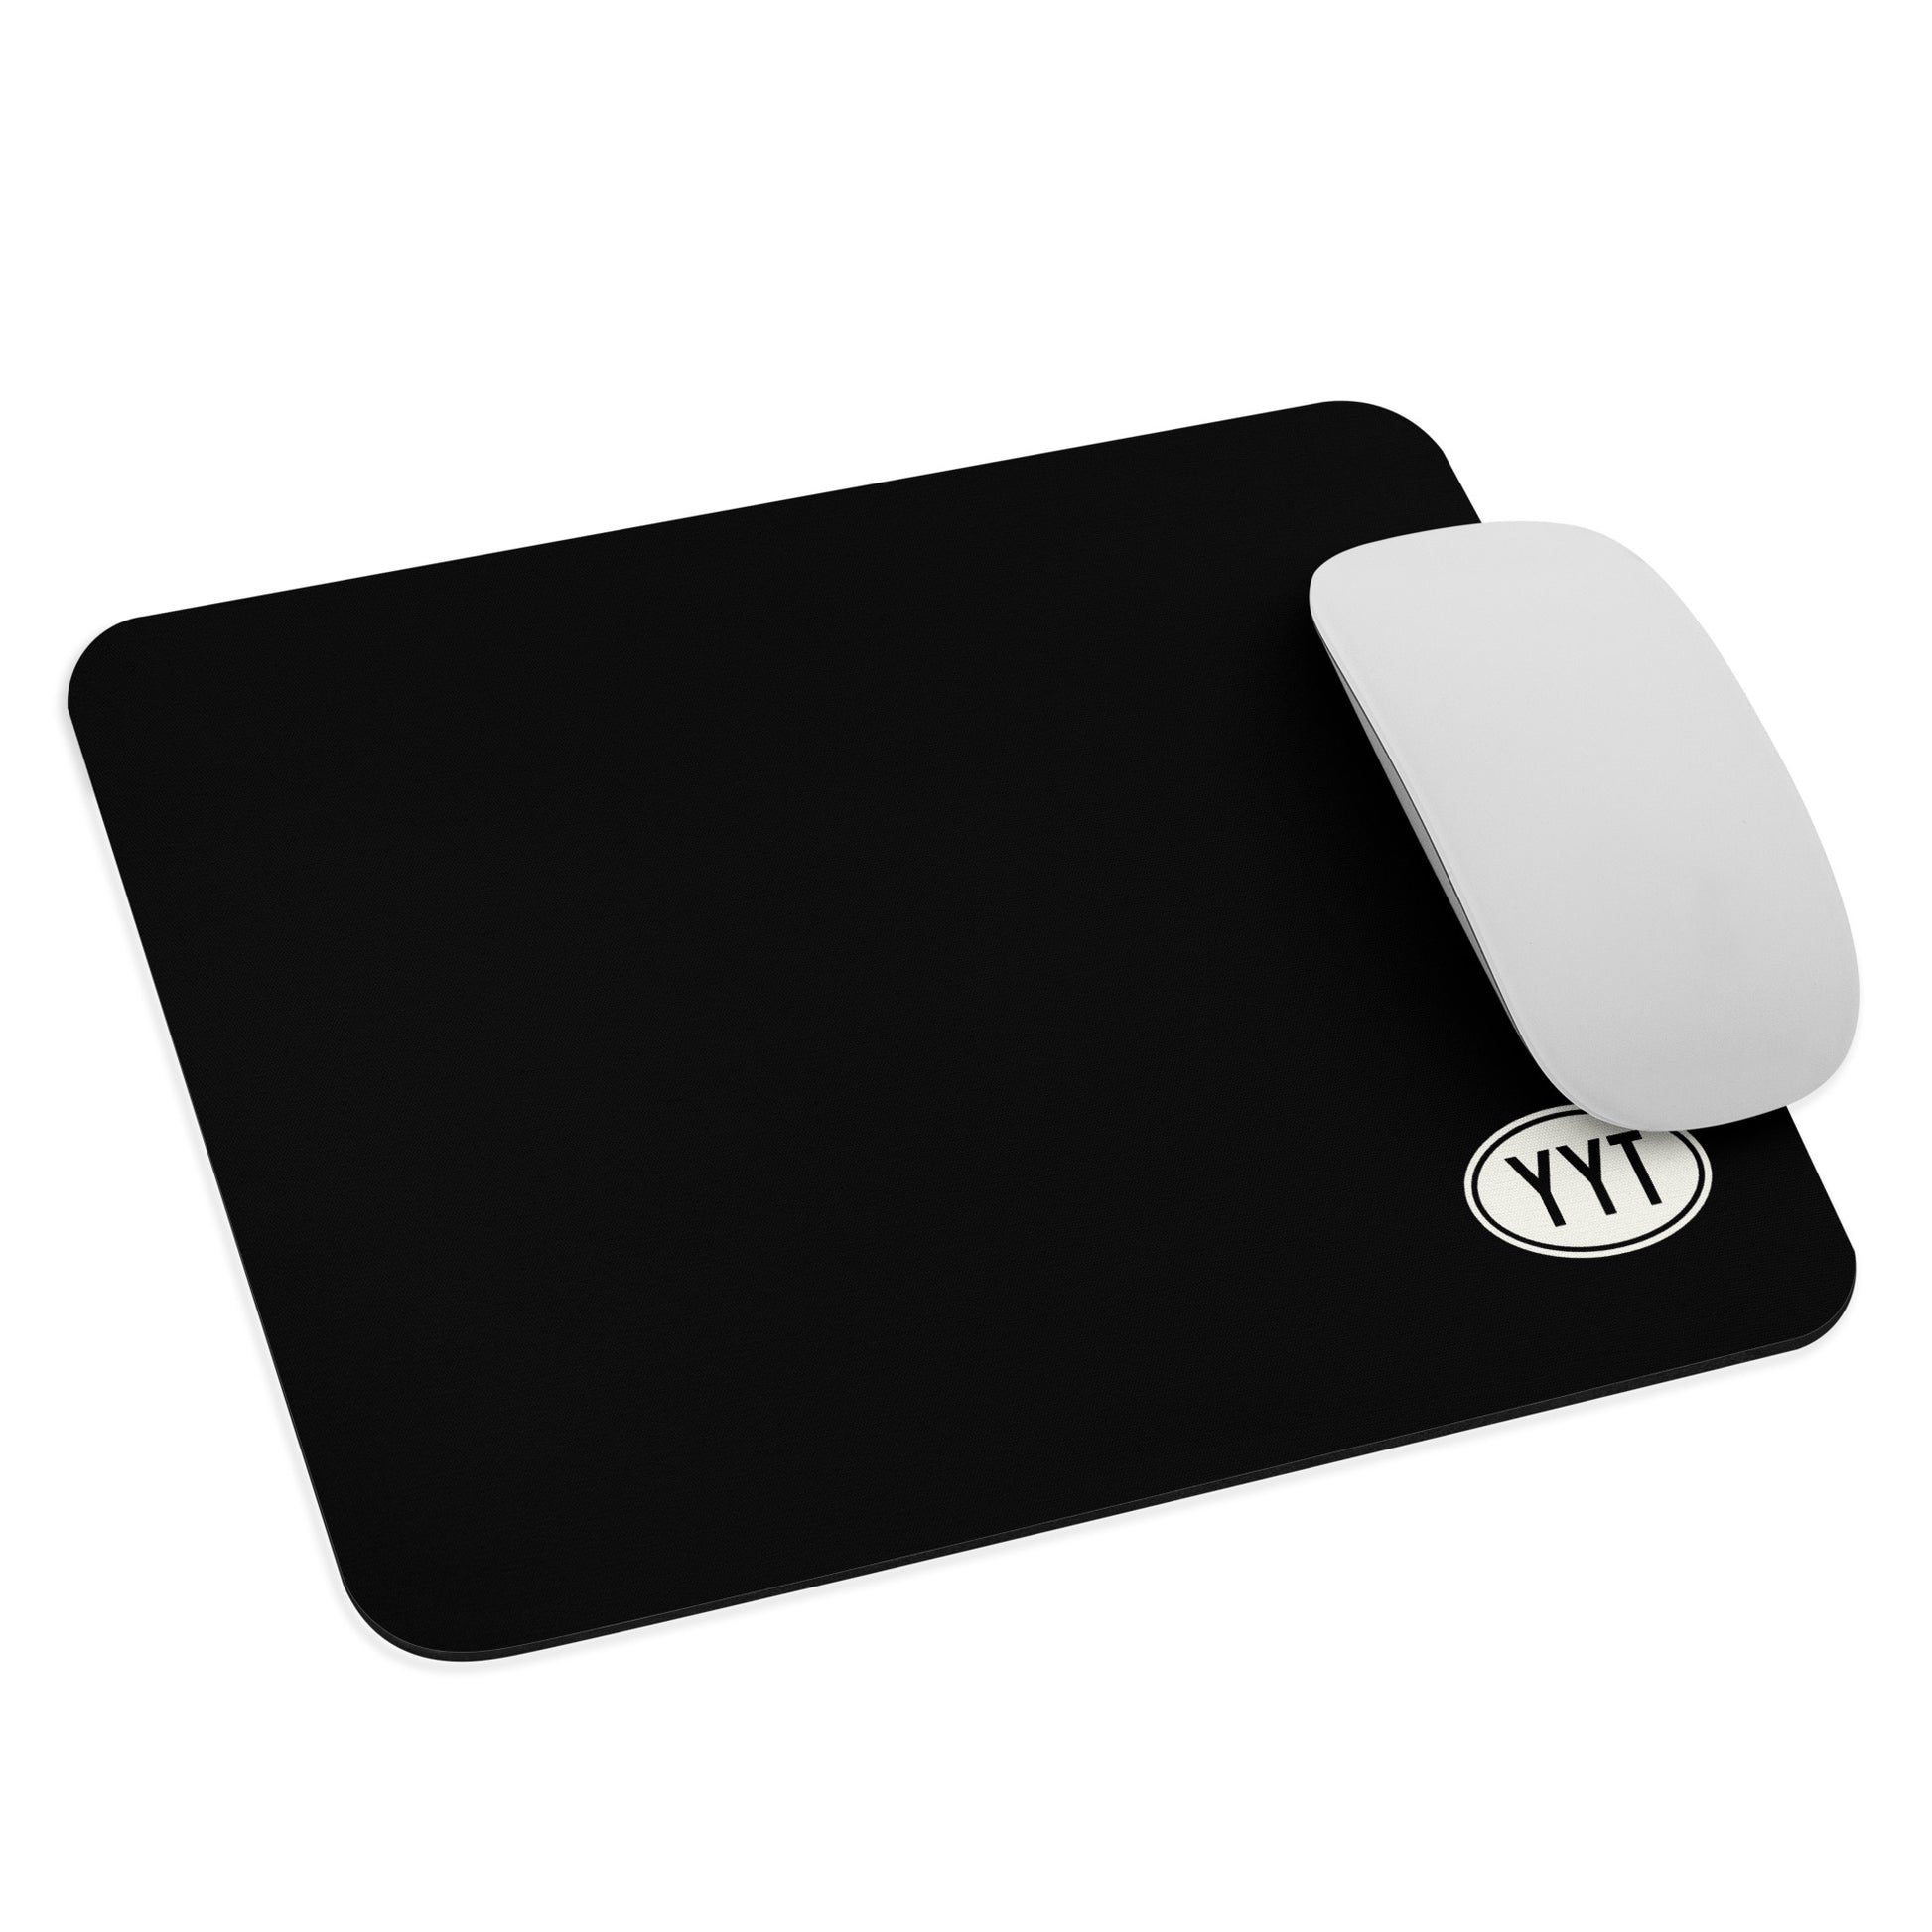 Unique Travel Gift Mouse Pad - White Oval • YYT St. John's • YHM Designs - Image 03